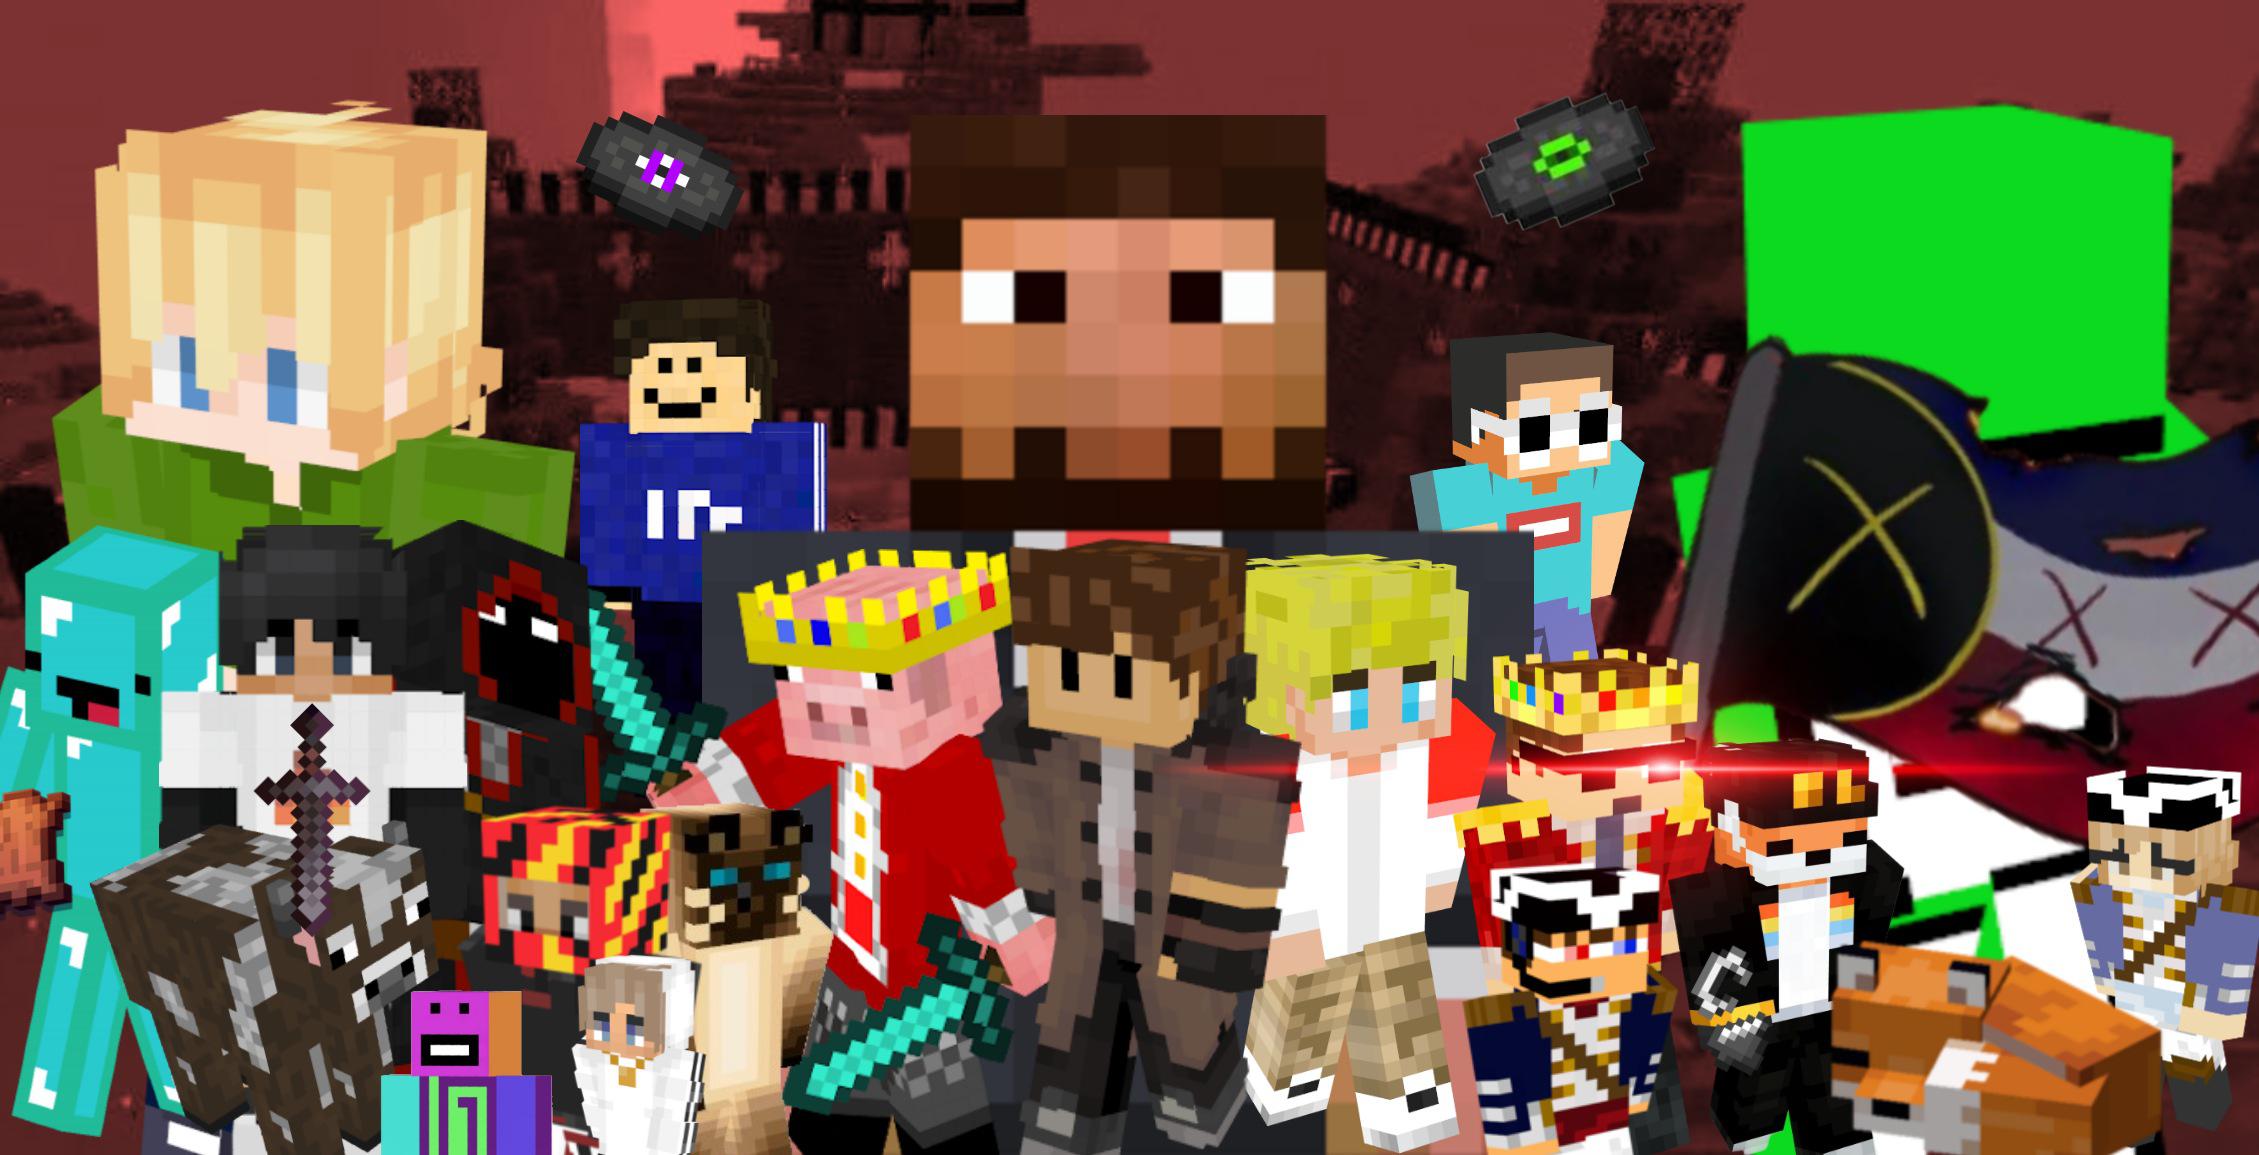 Fan Picture For The Dream SMP, Put Together By Me, Small Details Easter Eggs Are There As Well